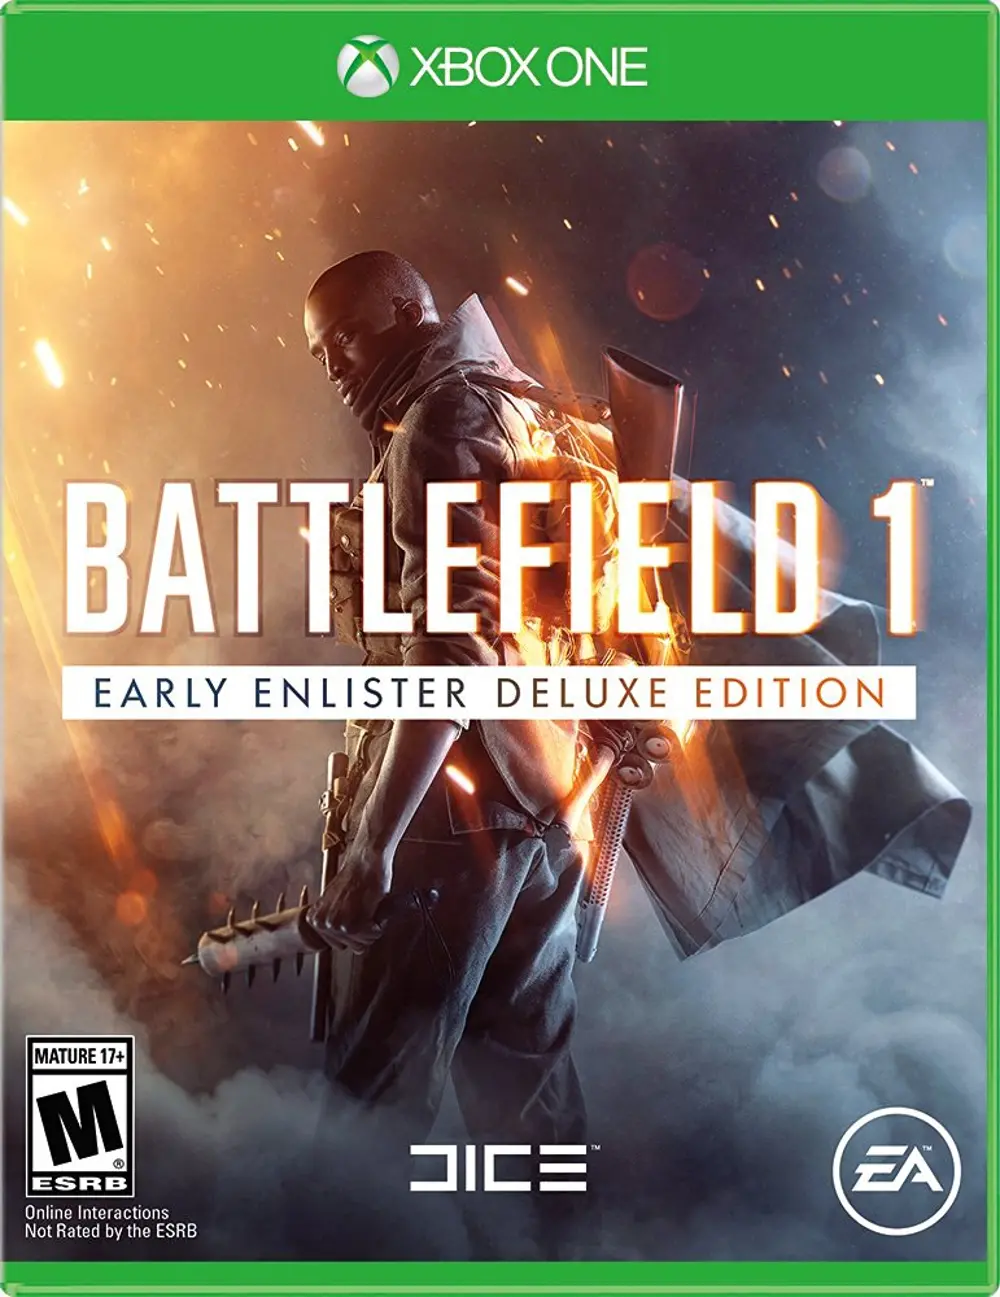 XB1 ELA 37121 Battlefield 1: Early Enlister Deluxe Edition - Xbox One-1